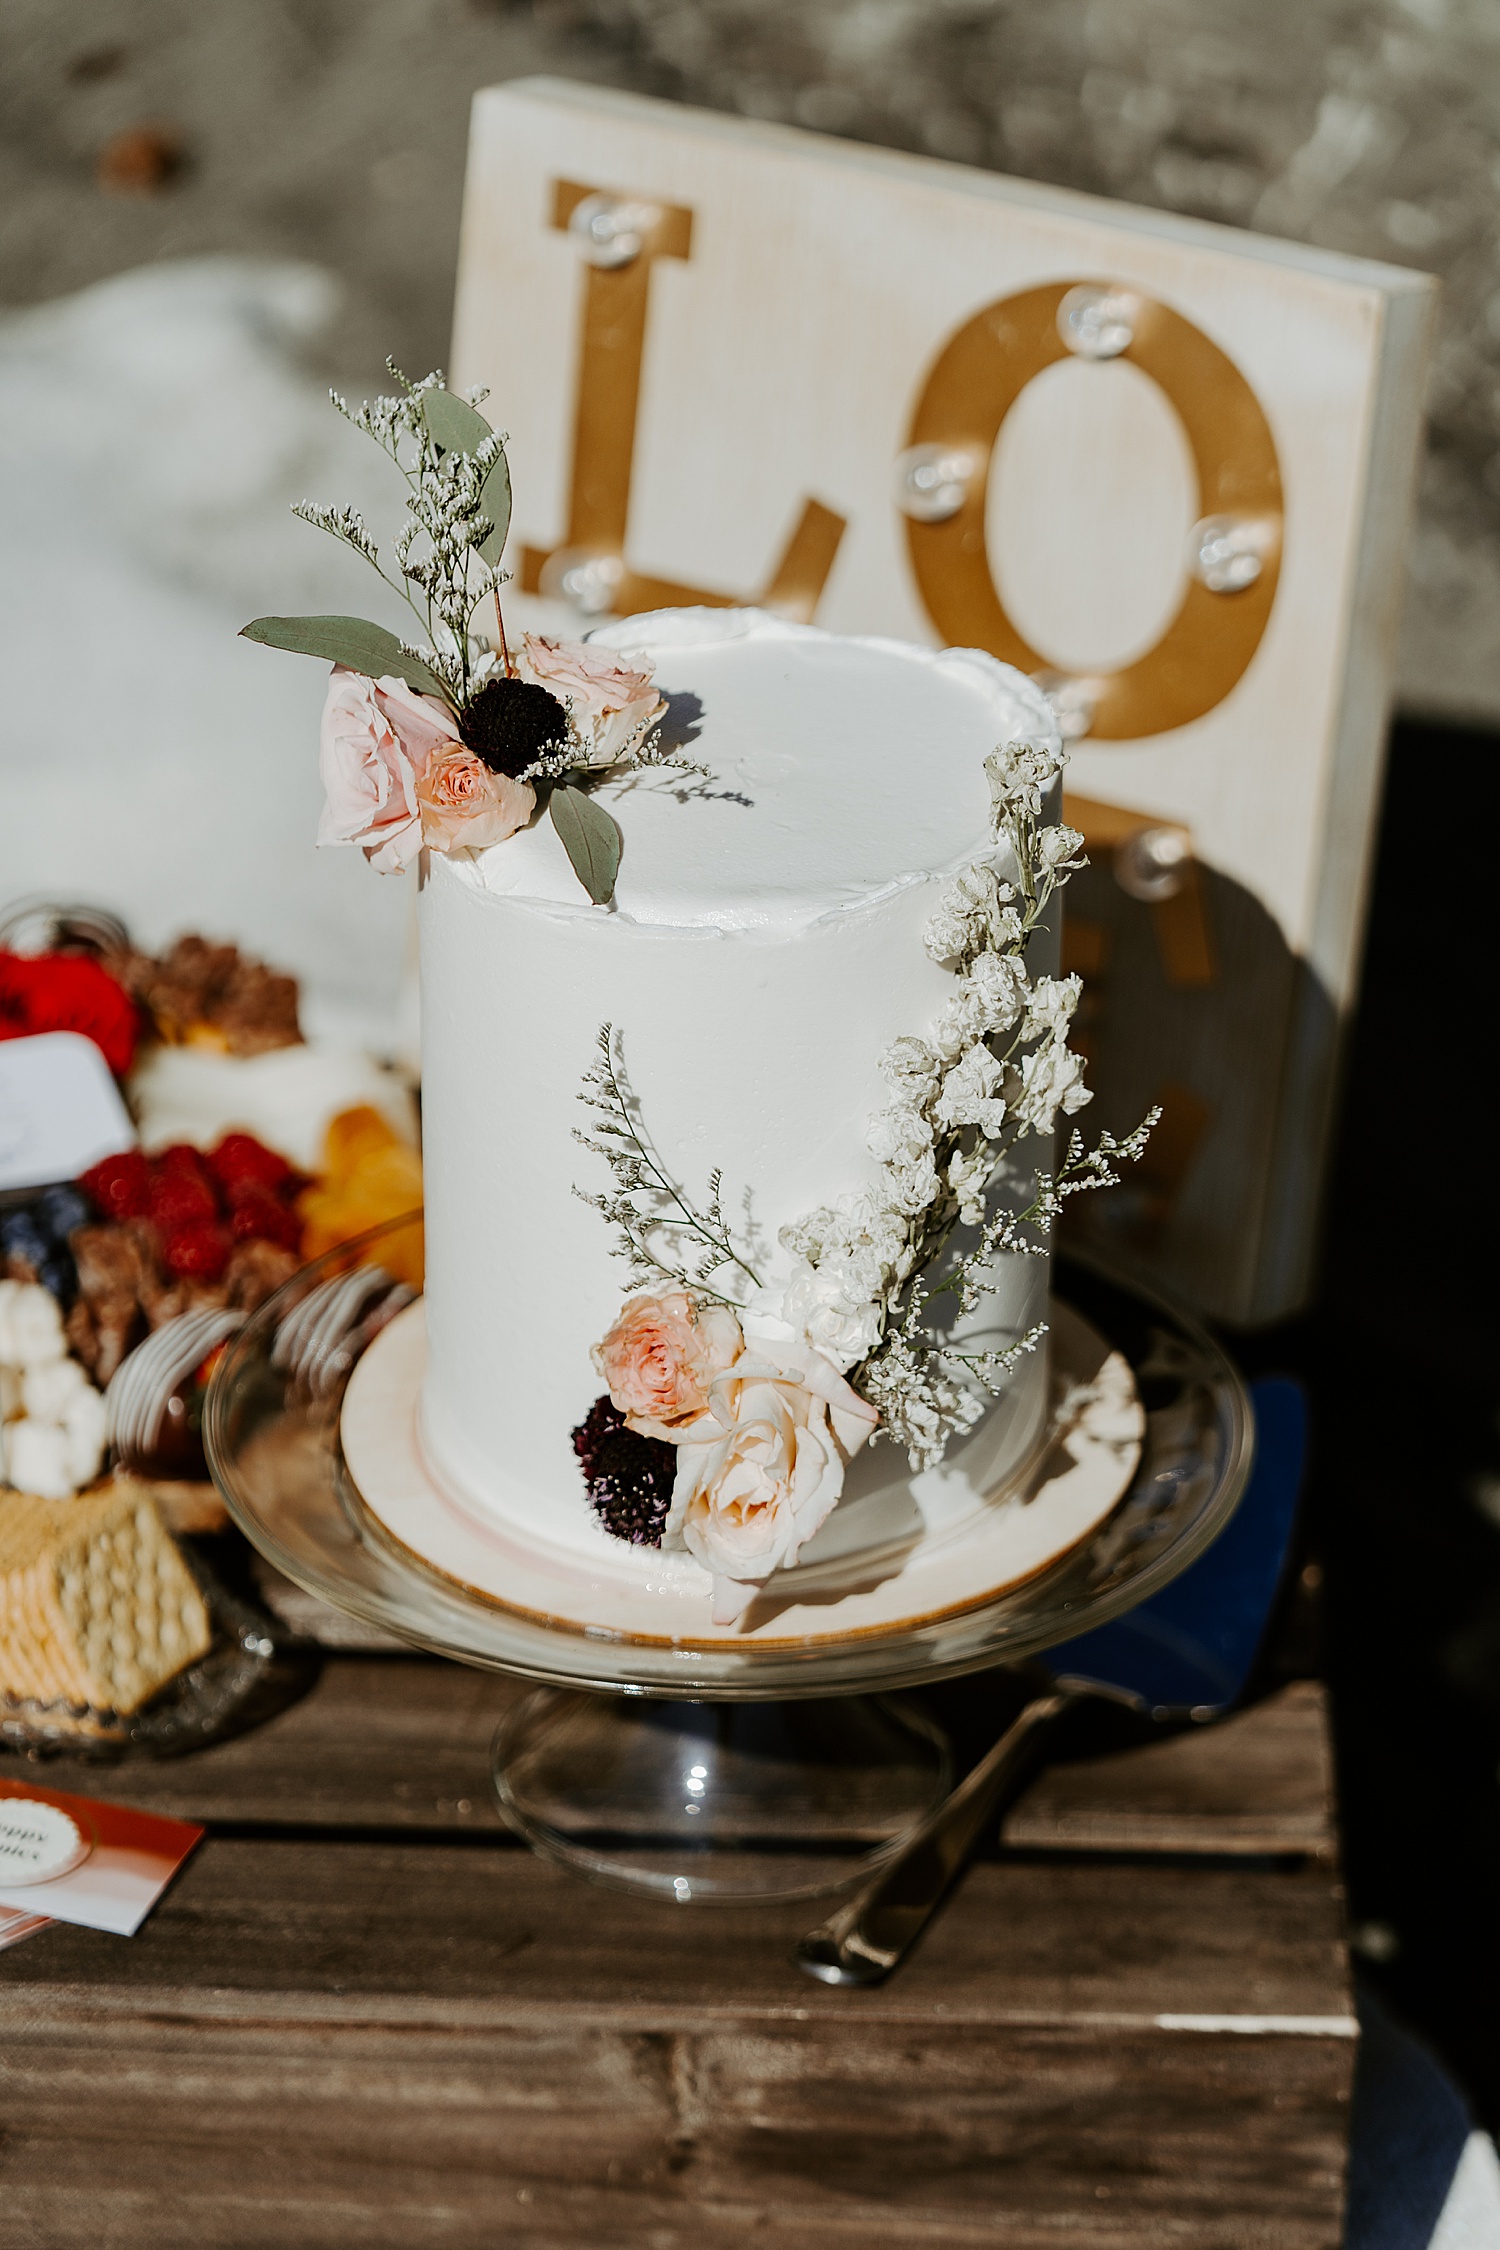 Simple white wedding cake with floral details